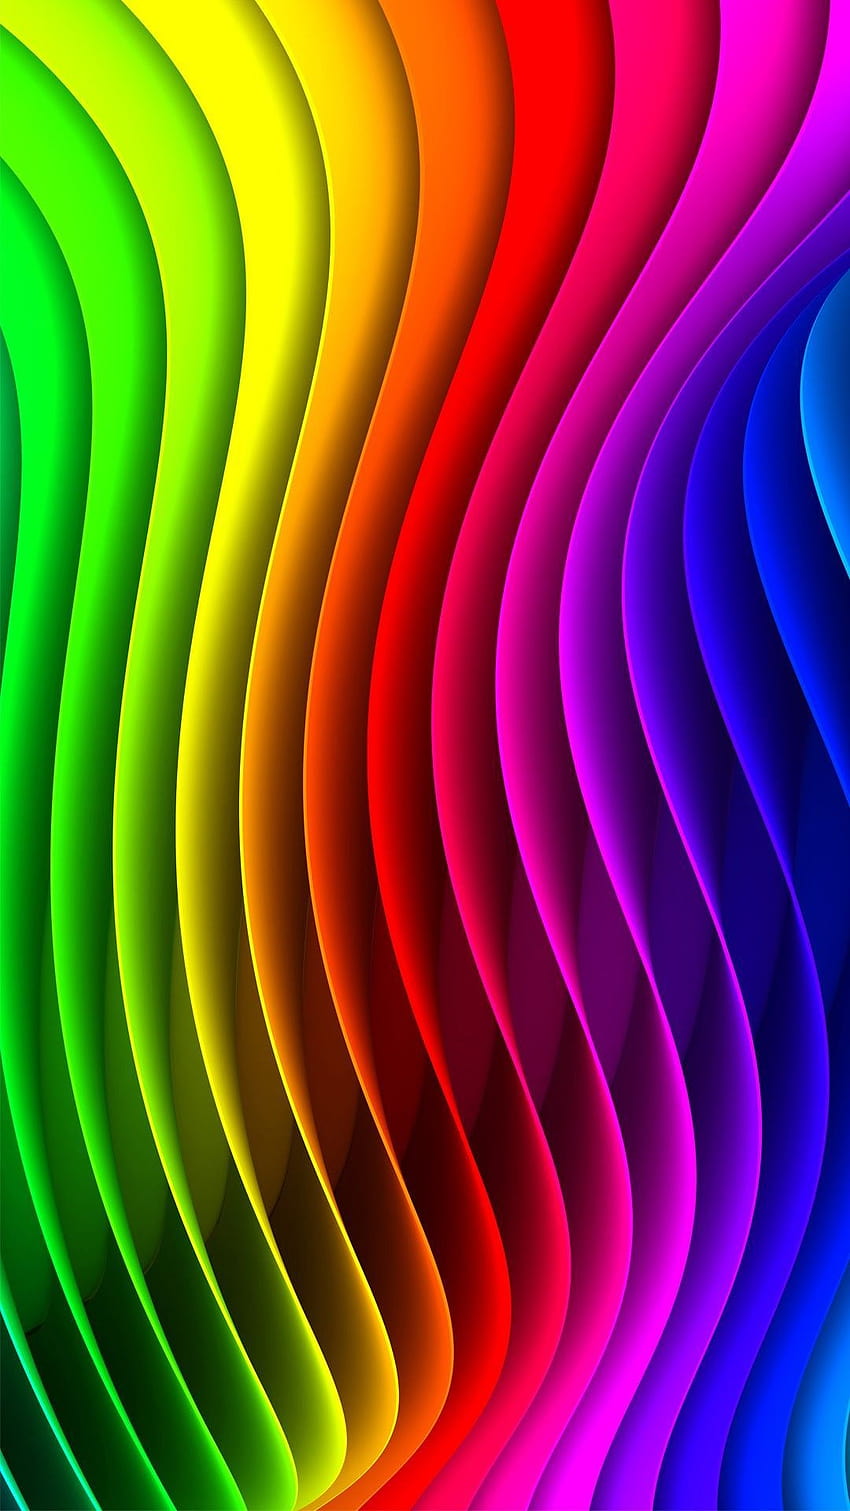 Wavy Rainbow Abstract Colourful Iphone Colorful Abstract in 2021, colorful wavy bubbles HD phone wallpaper